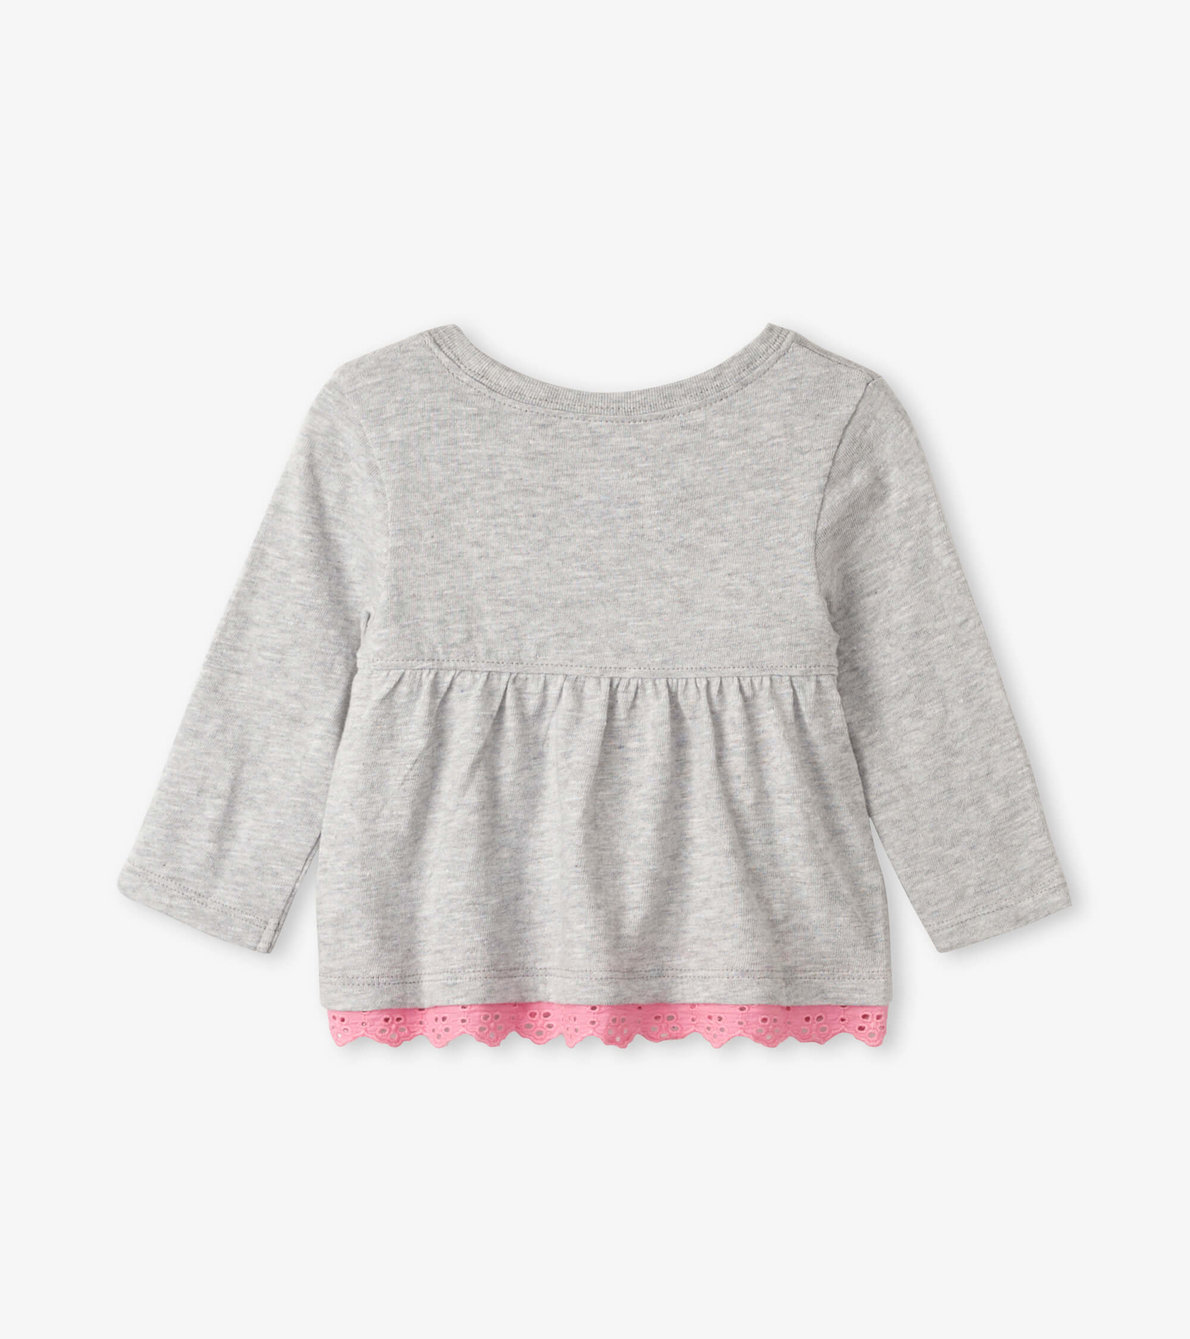 View larger image of Cute Bunny Long Sleeve Baby Tee